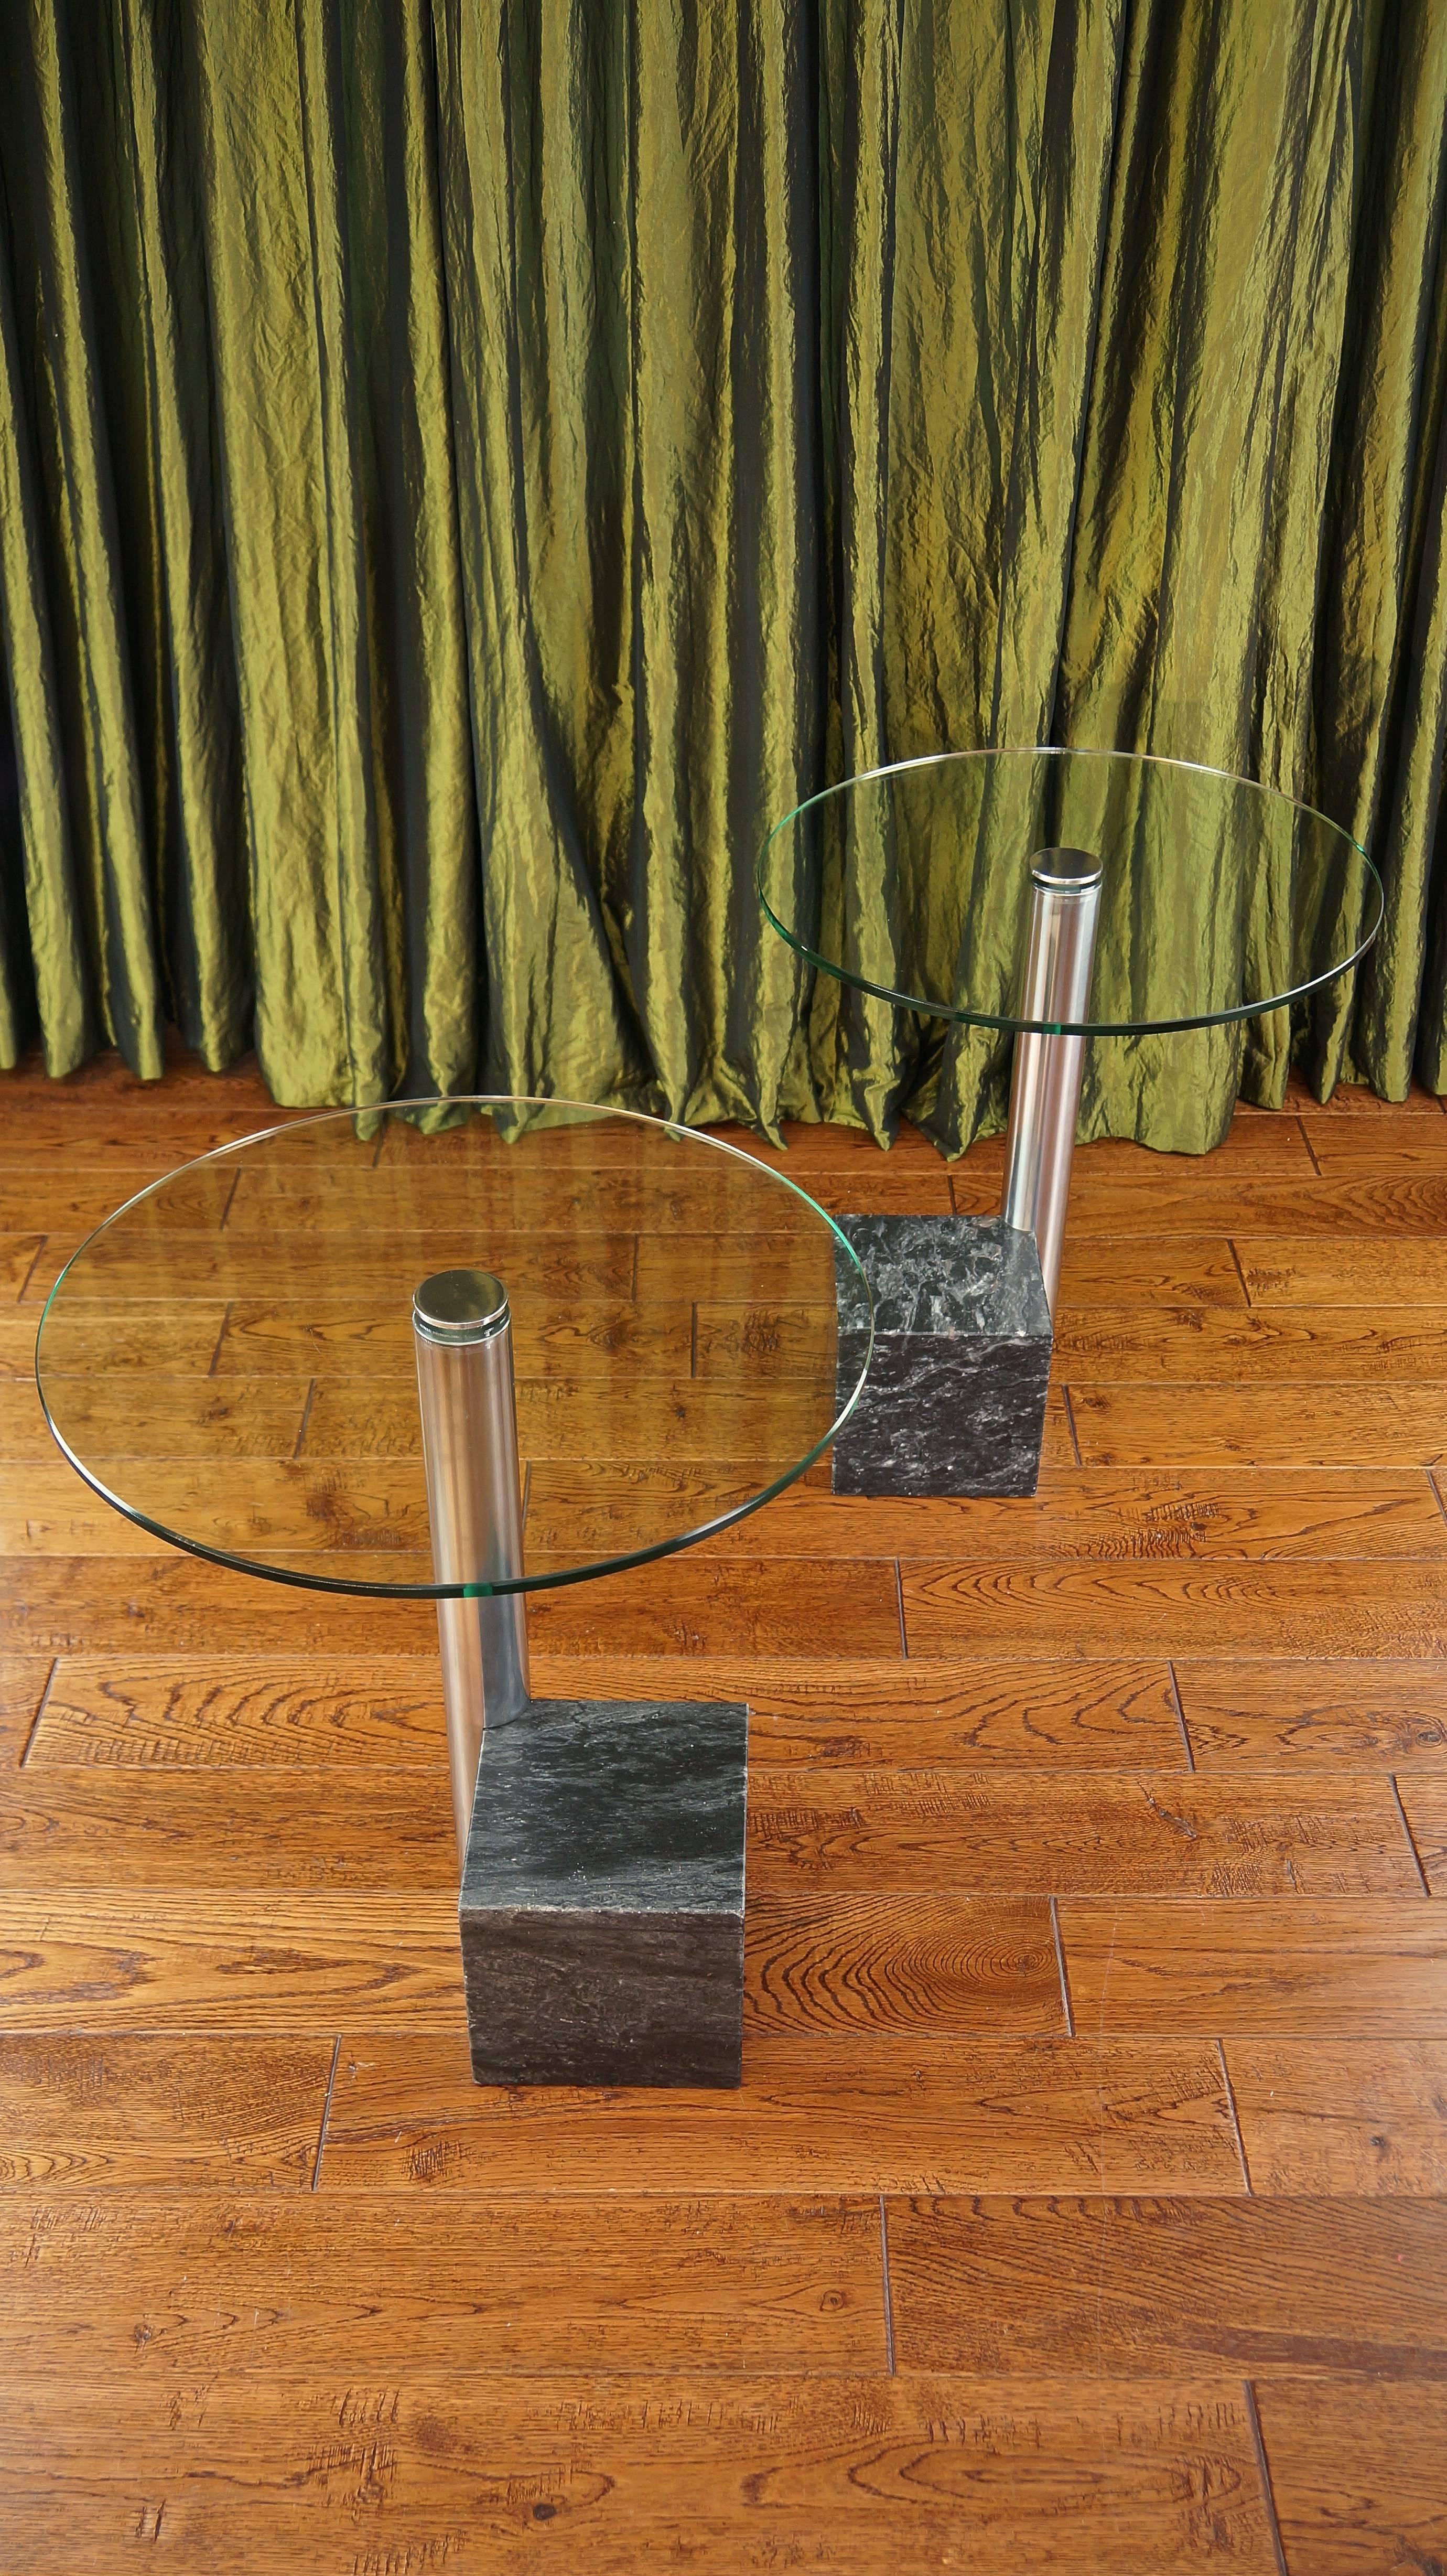 Pair of Vintage Marble and Glass HK2 Side Tables by Hank Kwint, Metaform 1980s For Sale 5